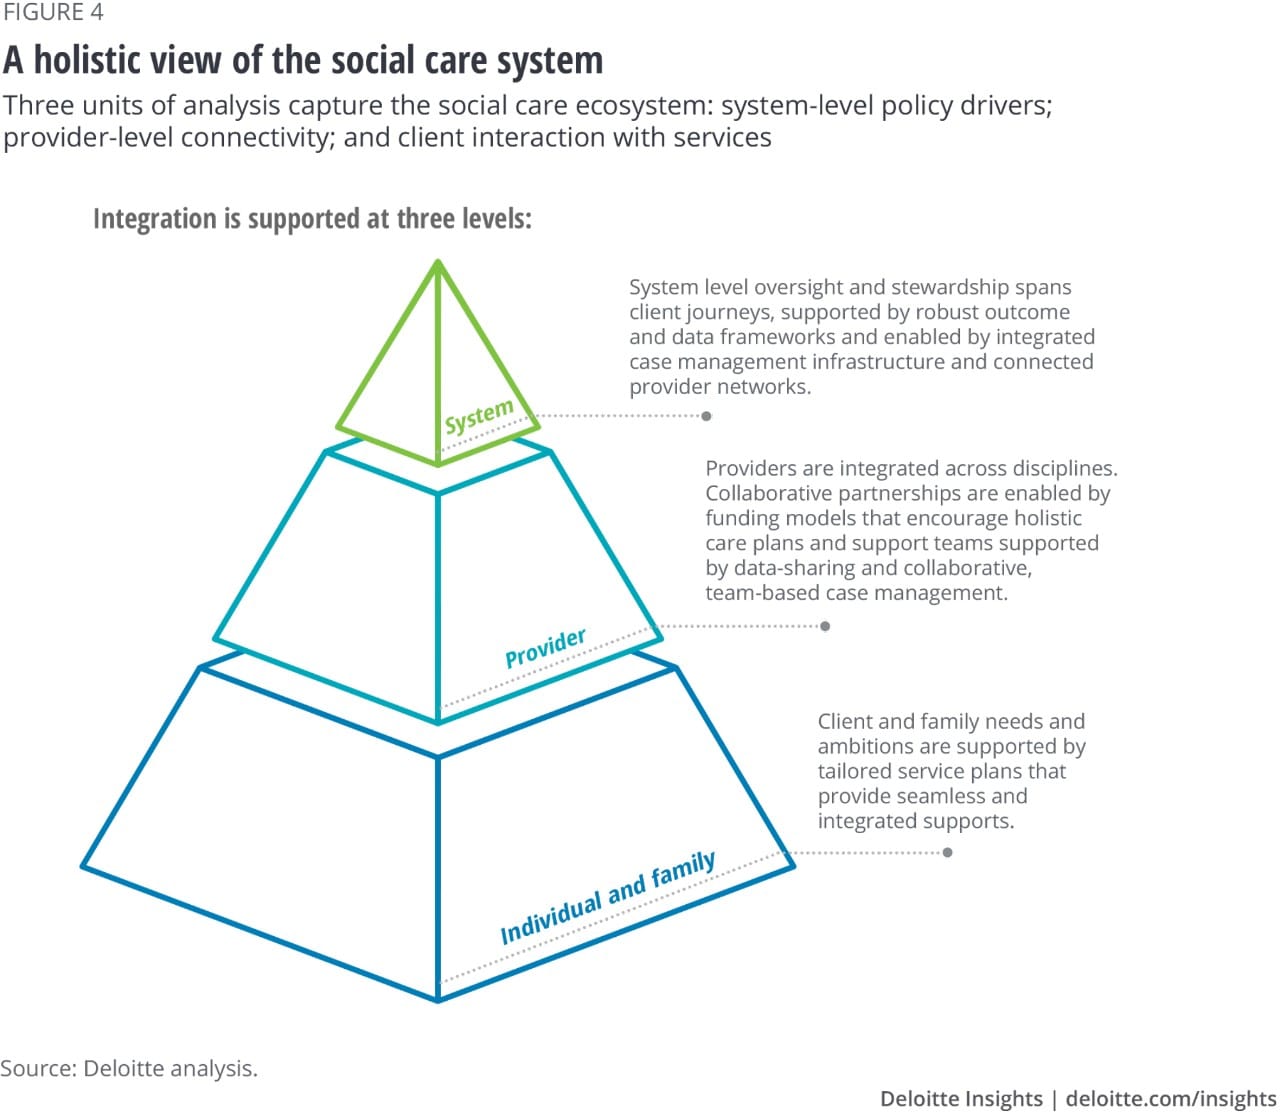 Figure 4. A holistic view of the social care ecosystem: Three units of analysis capture the social care ecosystem: system-level policy drivers; provider-level connectivity; and client interaction with services.